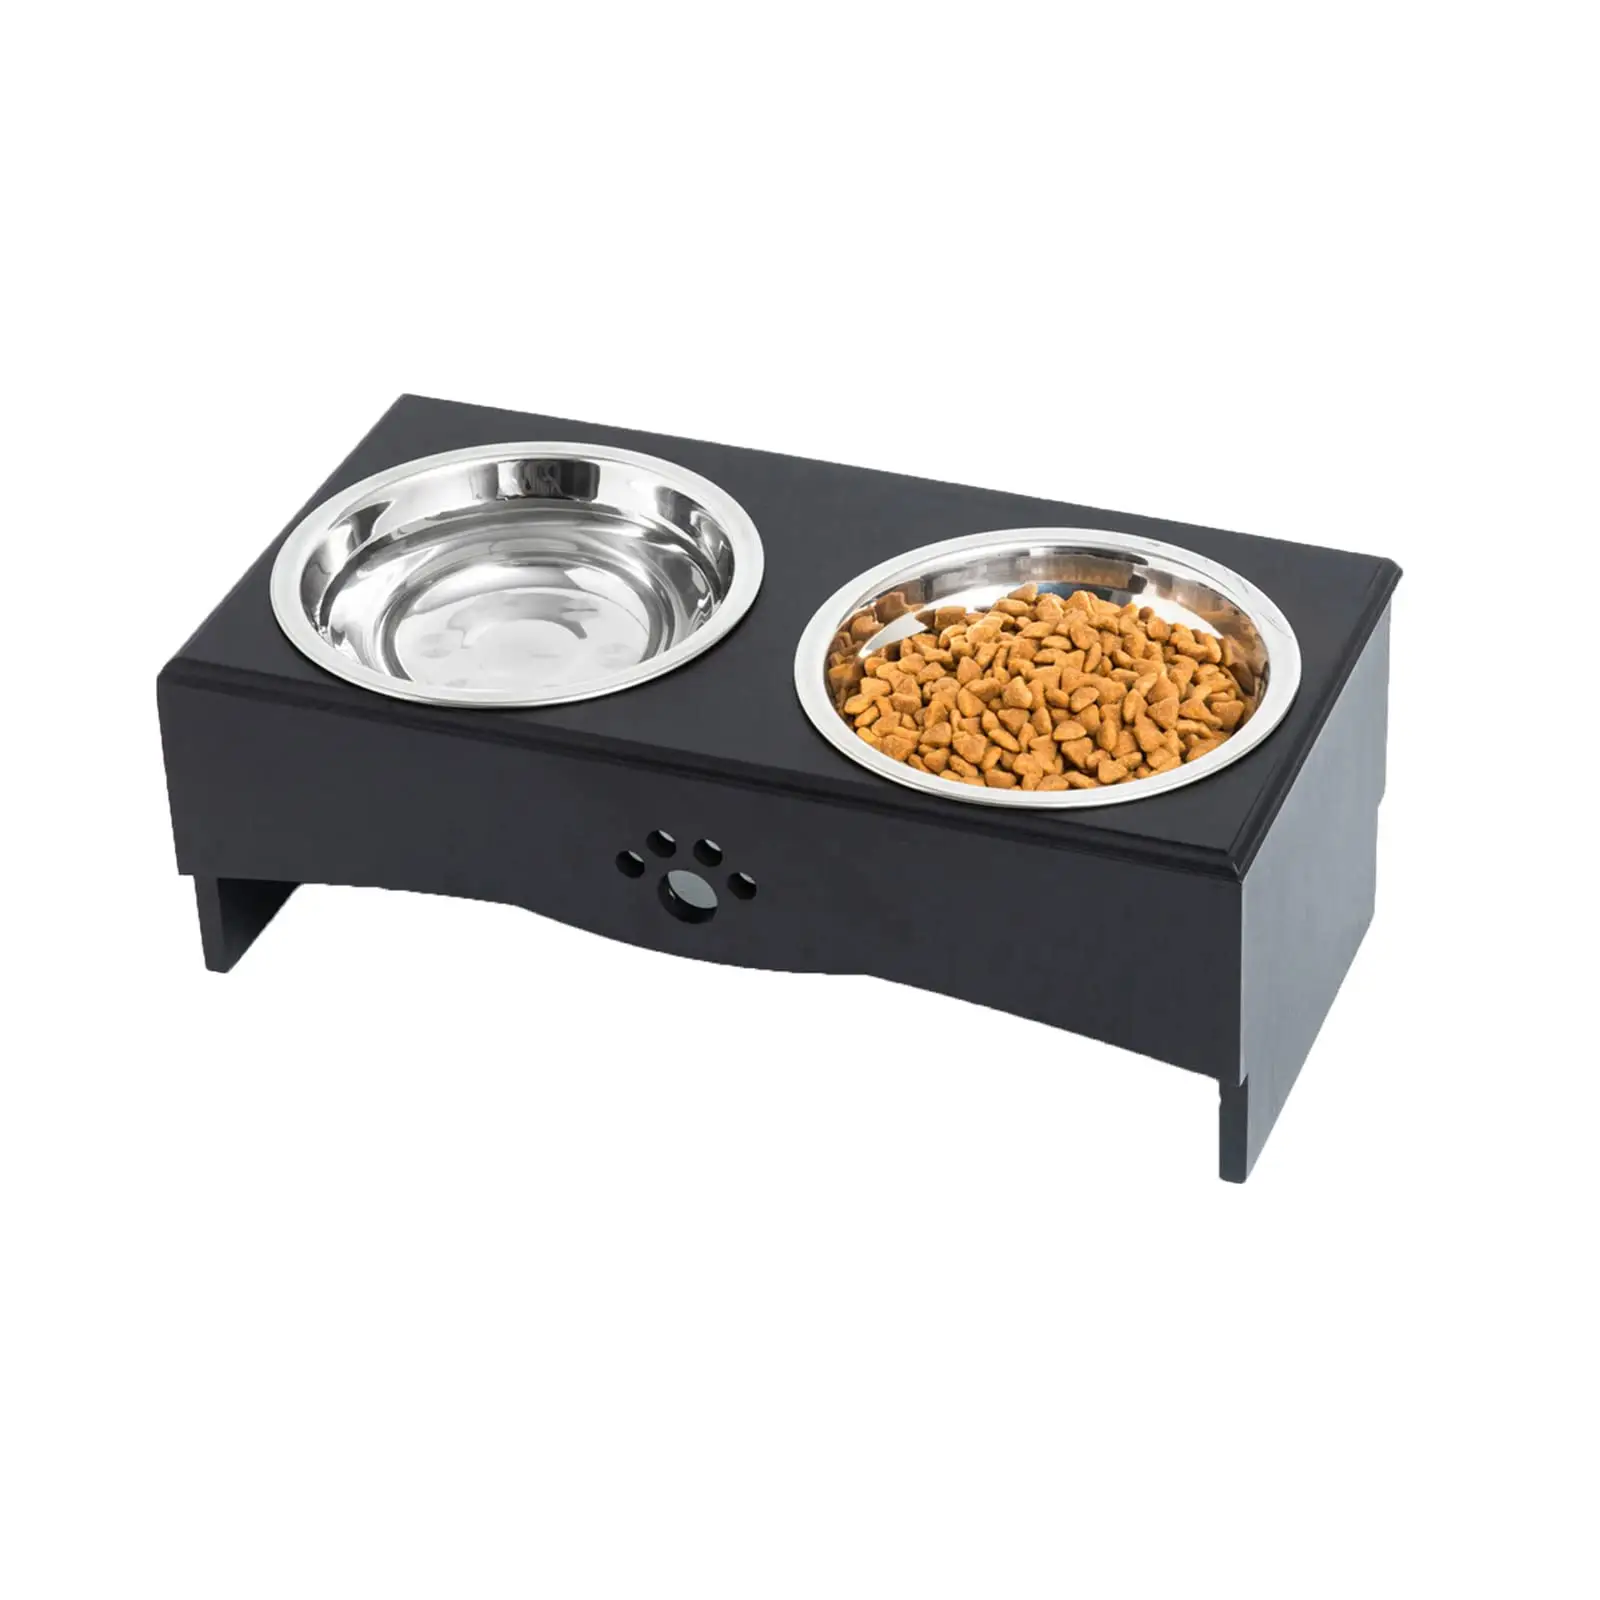 Raised Dog Bowls Stand For Small To Medium Dogs Bamboo Elevated Dog Food And Water Bowls Feeder Holder